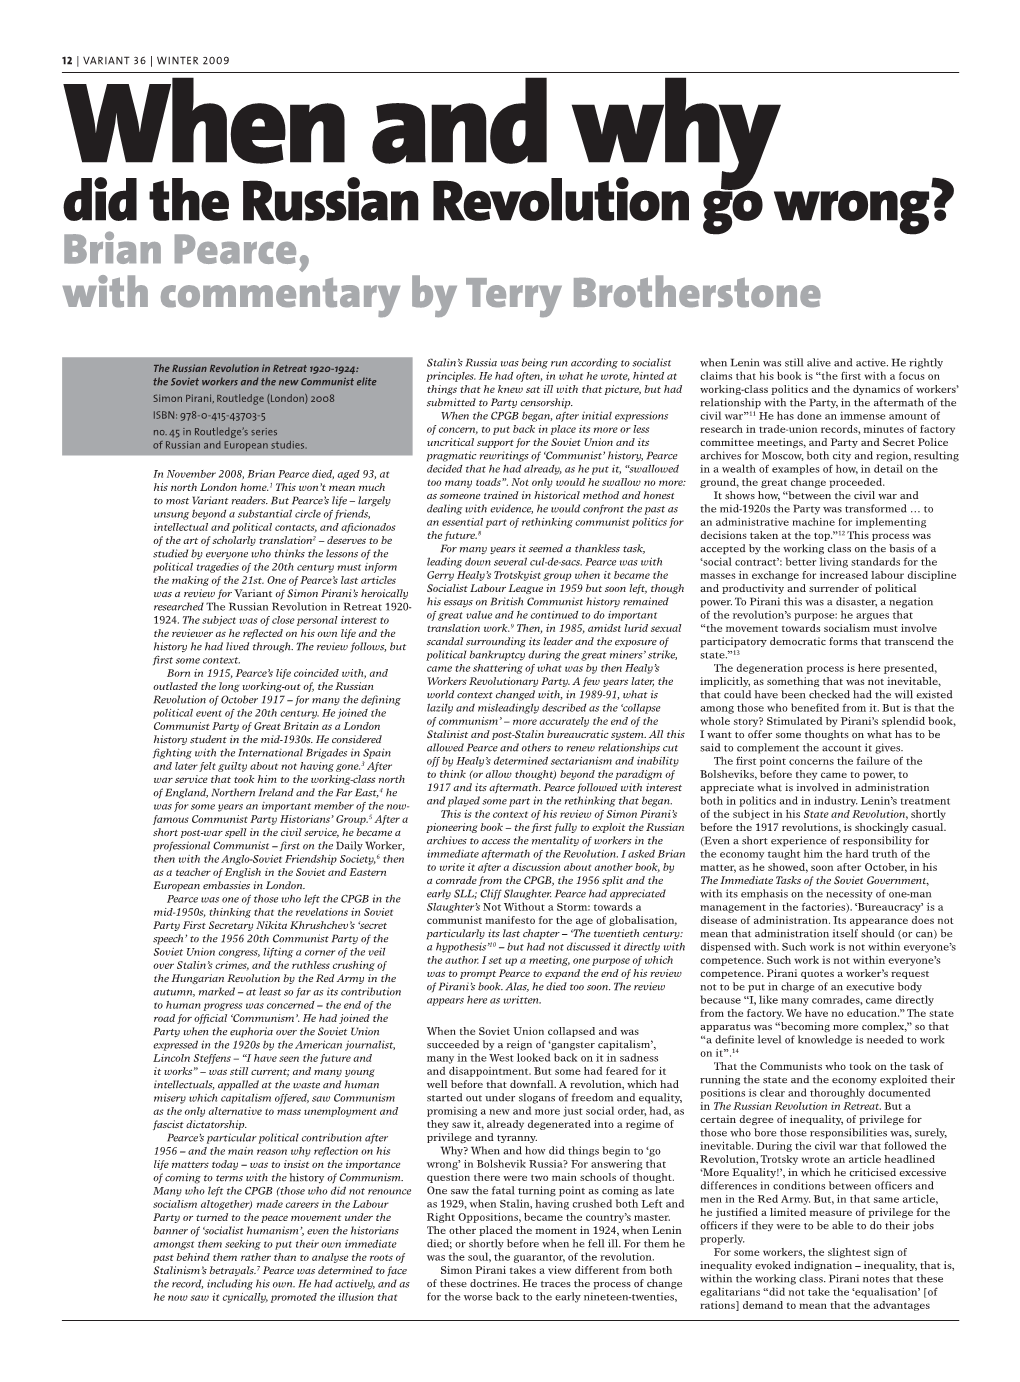 Did the Russian Revolution Go Wrong? Brian Pearce, with Commentary by Terry Brotherstone